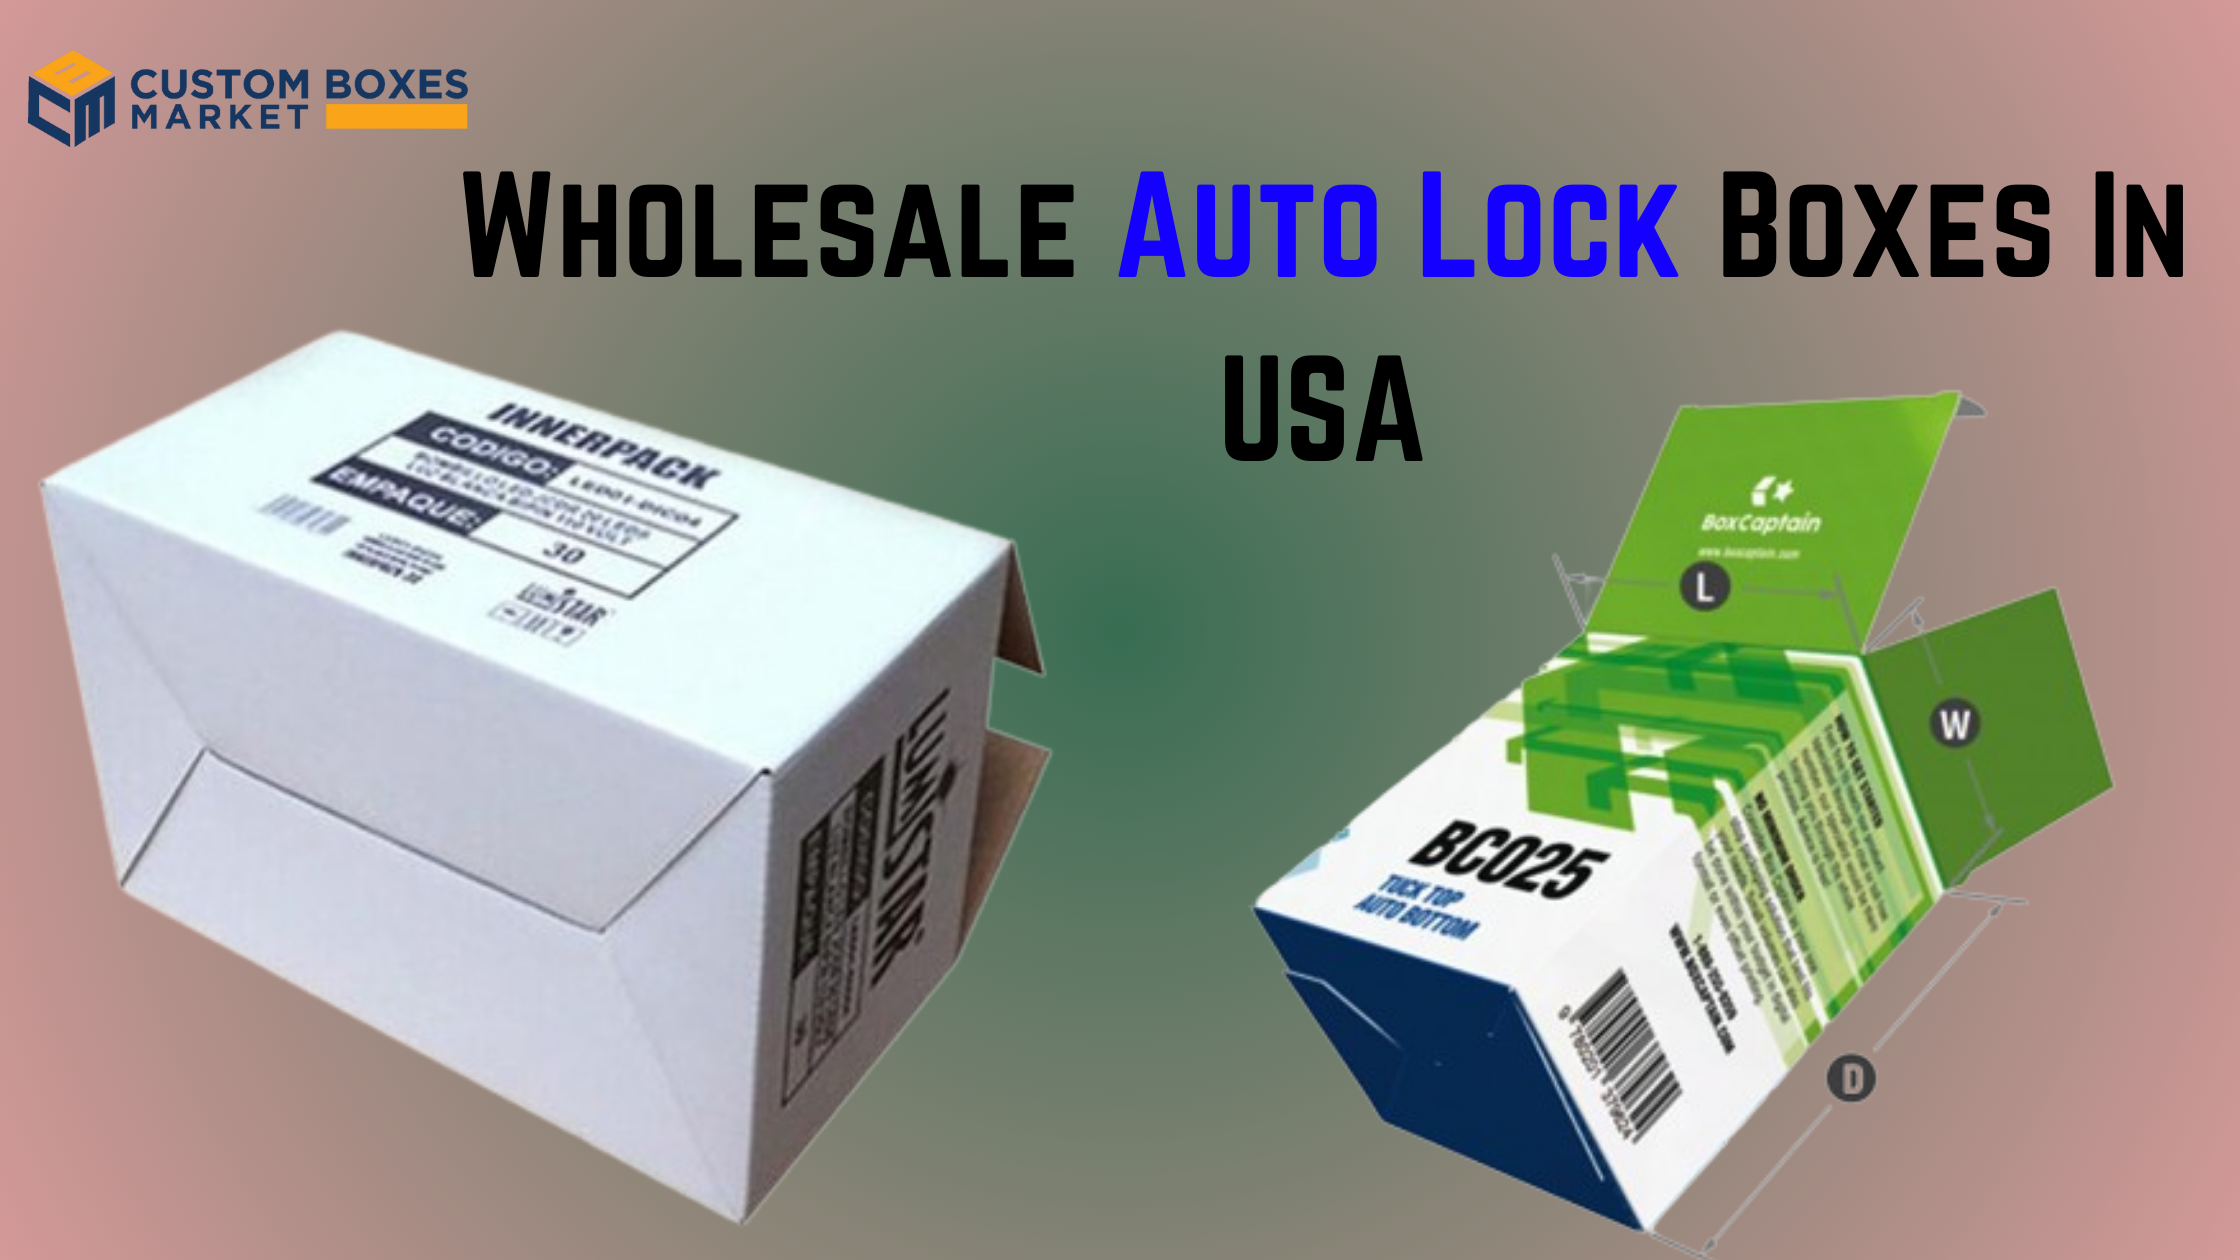 Custom Auto Lock Boxes Explained The Art of Packaging